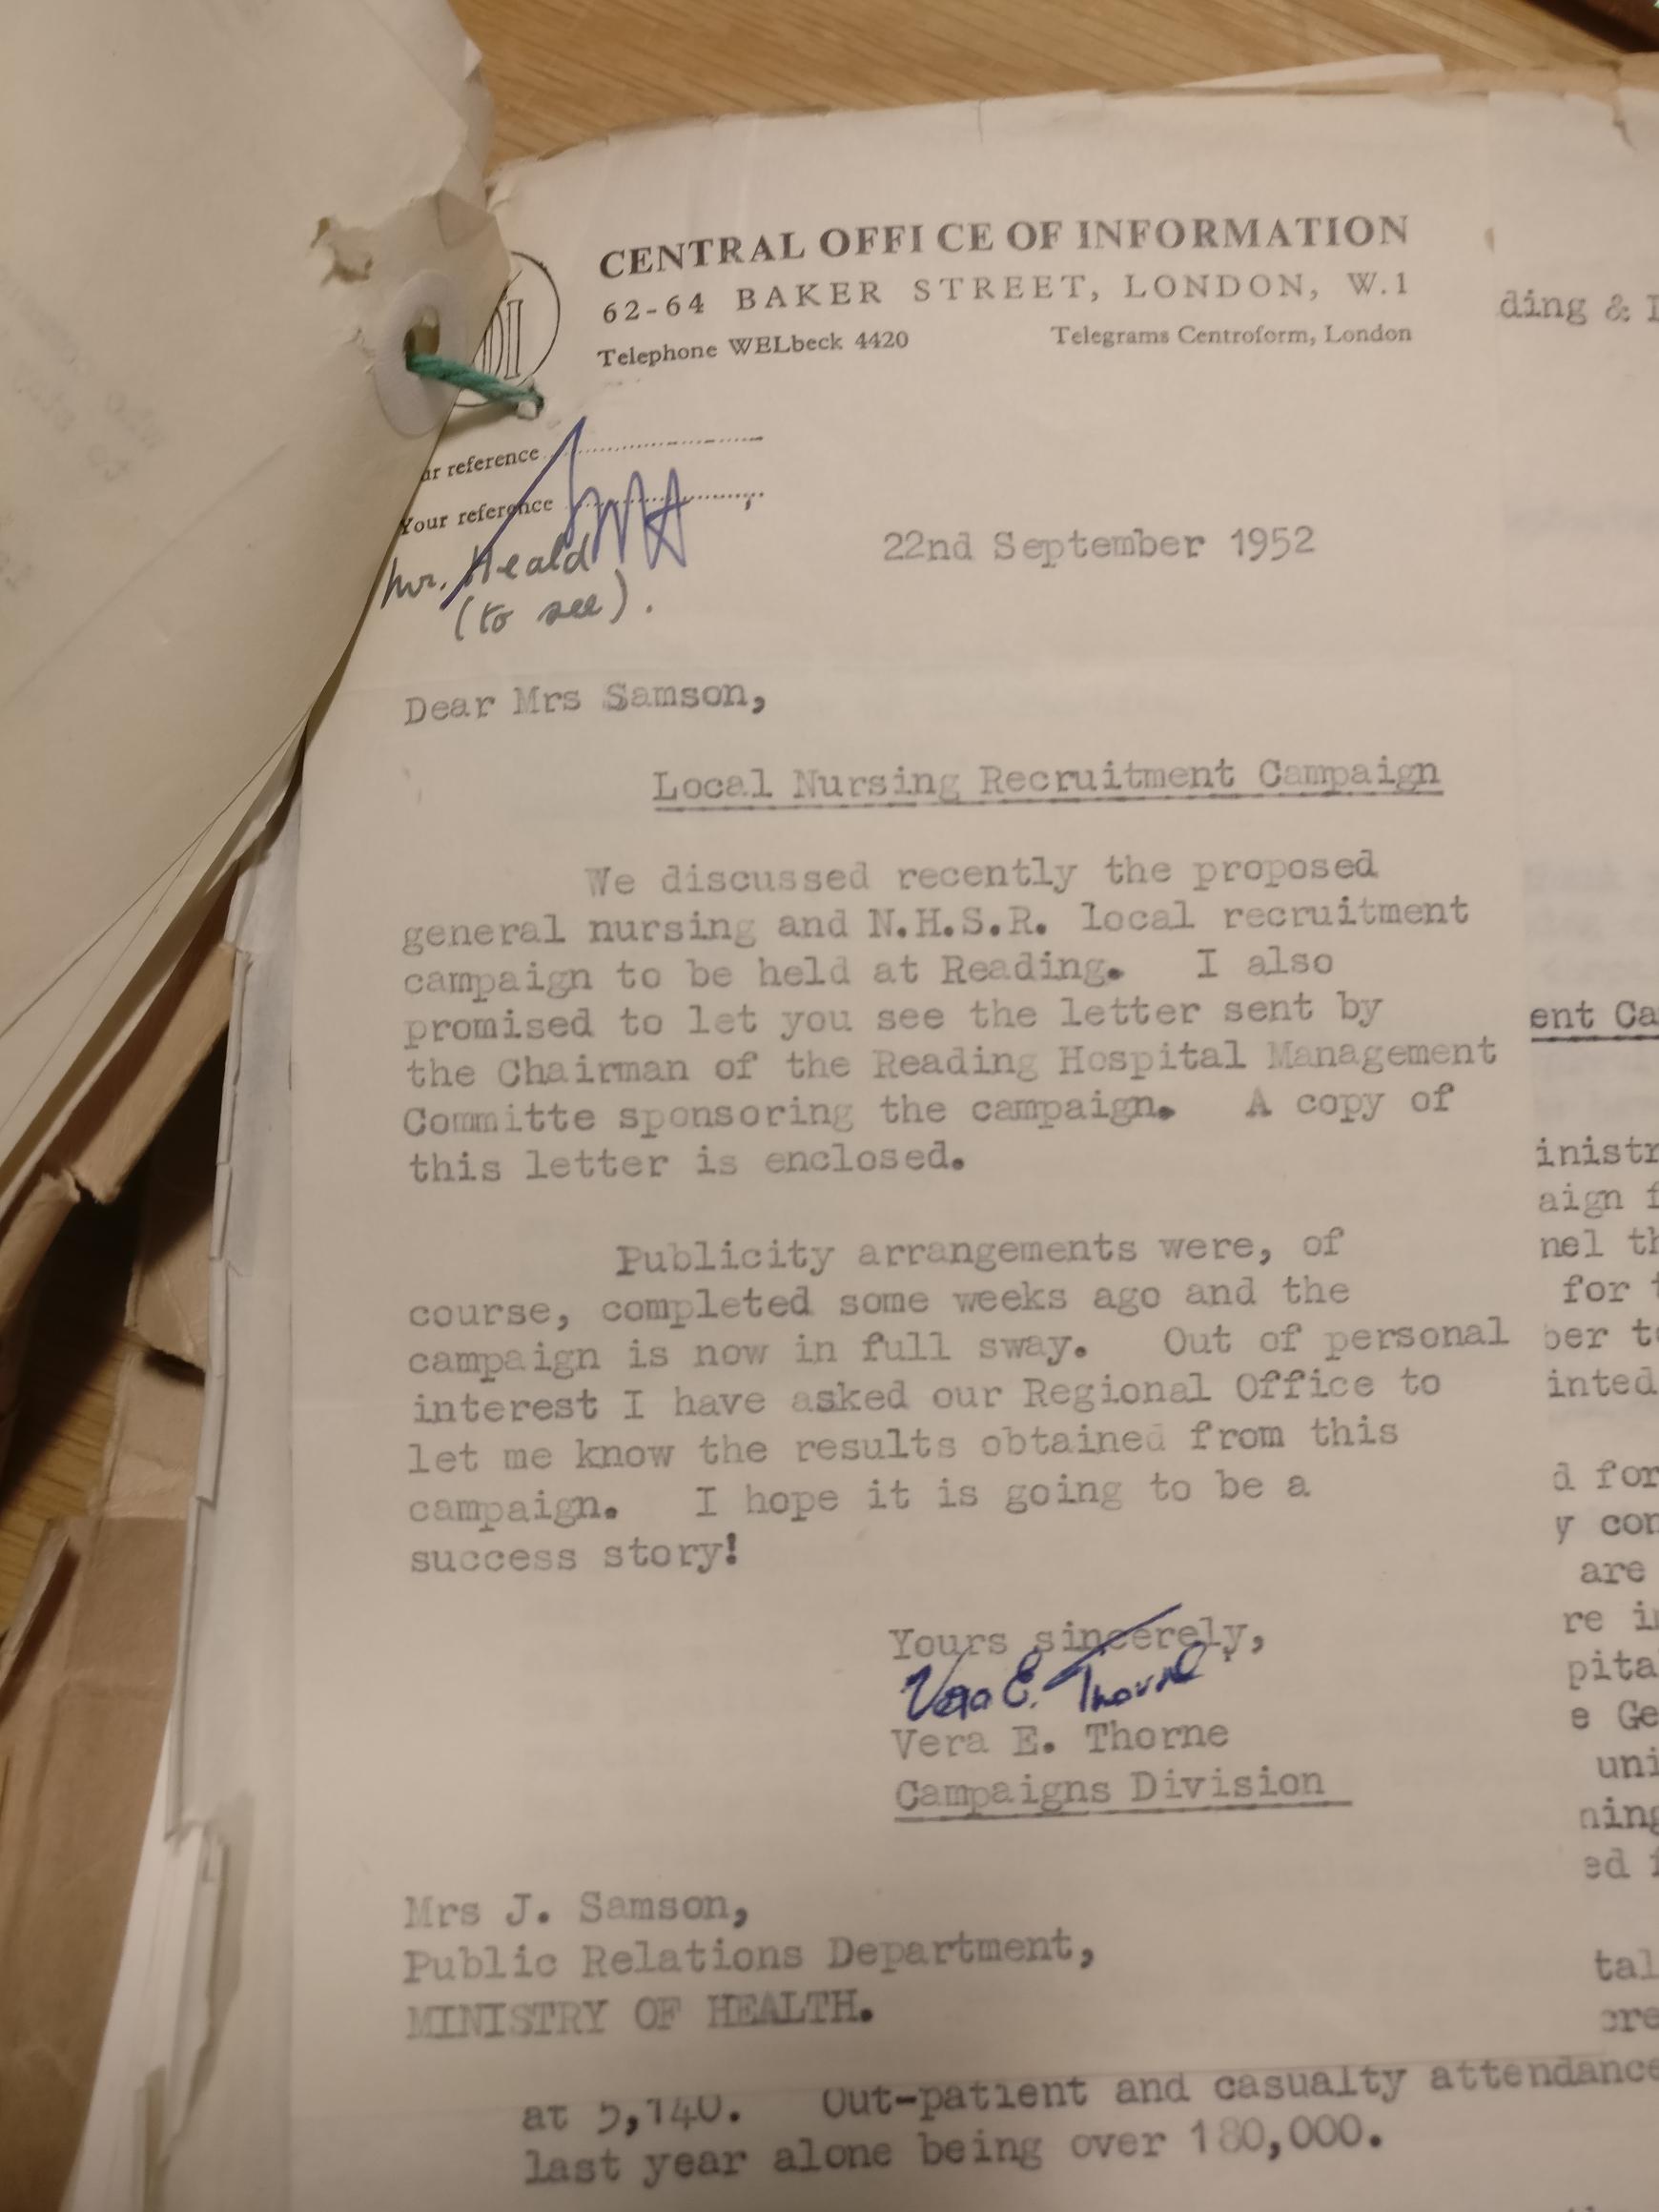 A letter from the Central Office of Information to the Ministry of Health regarding nursing recruitment, September 1952. Catalogue reference: MH 55/944